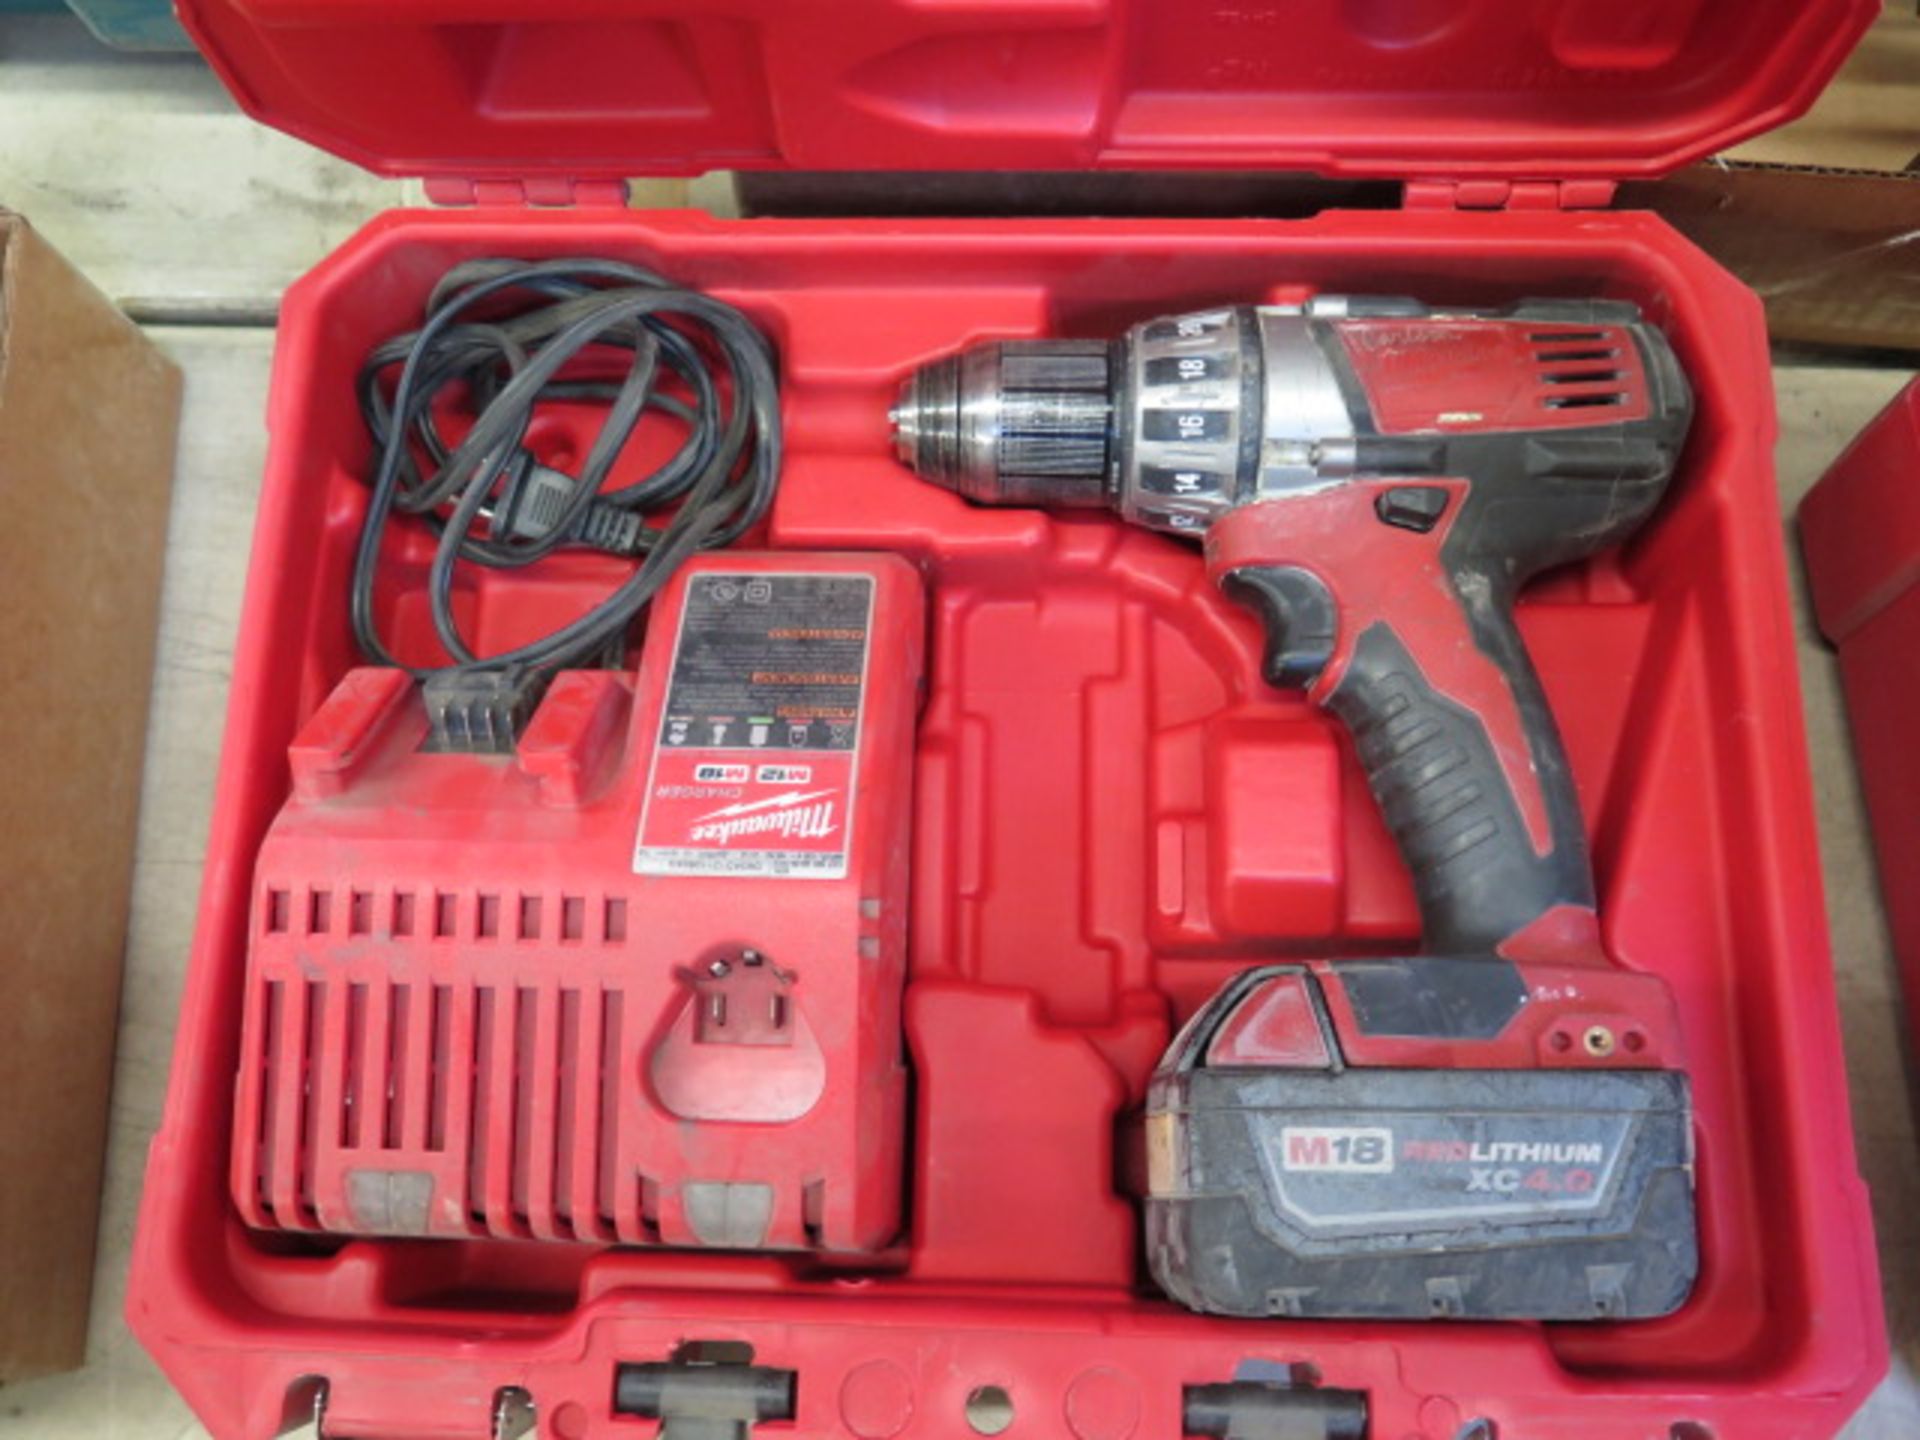 Milwaukee 18Volt Drill Kits (2) w/ Chargers (SOLD AS-IS - NO WARRANTY) - Image 5 of 5